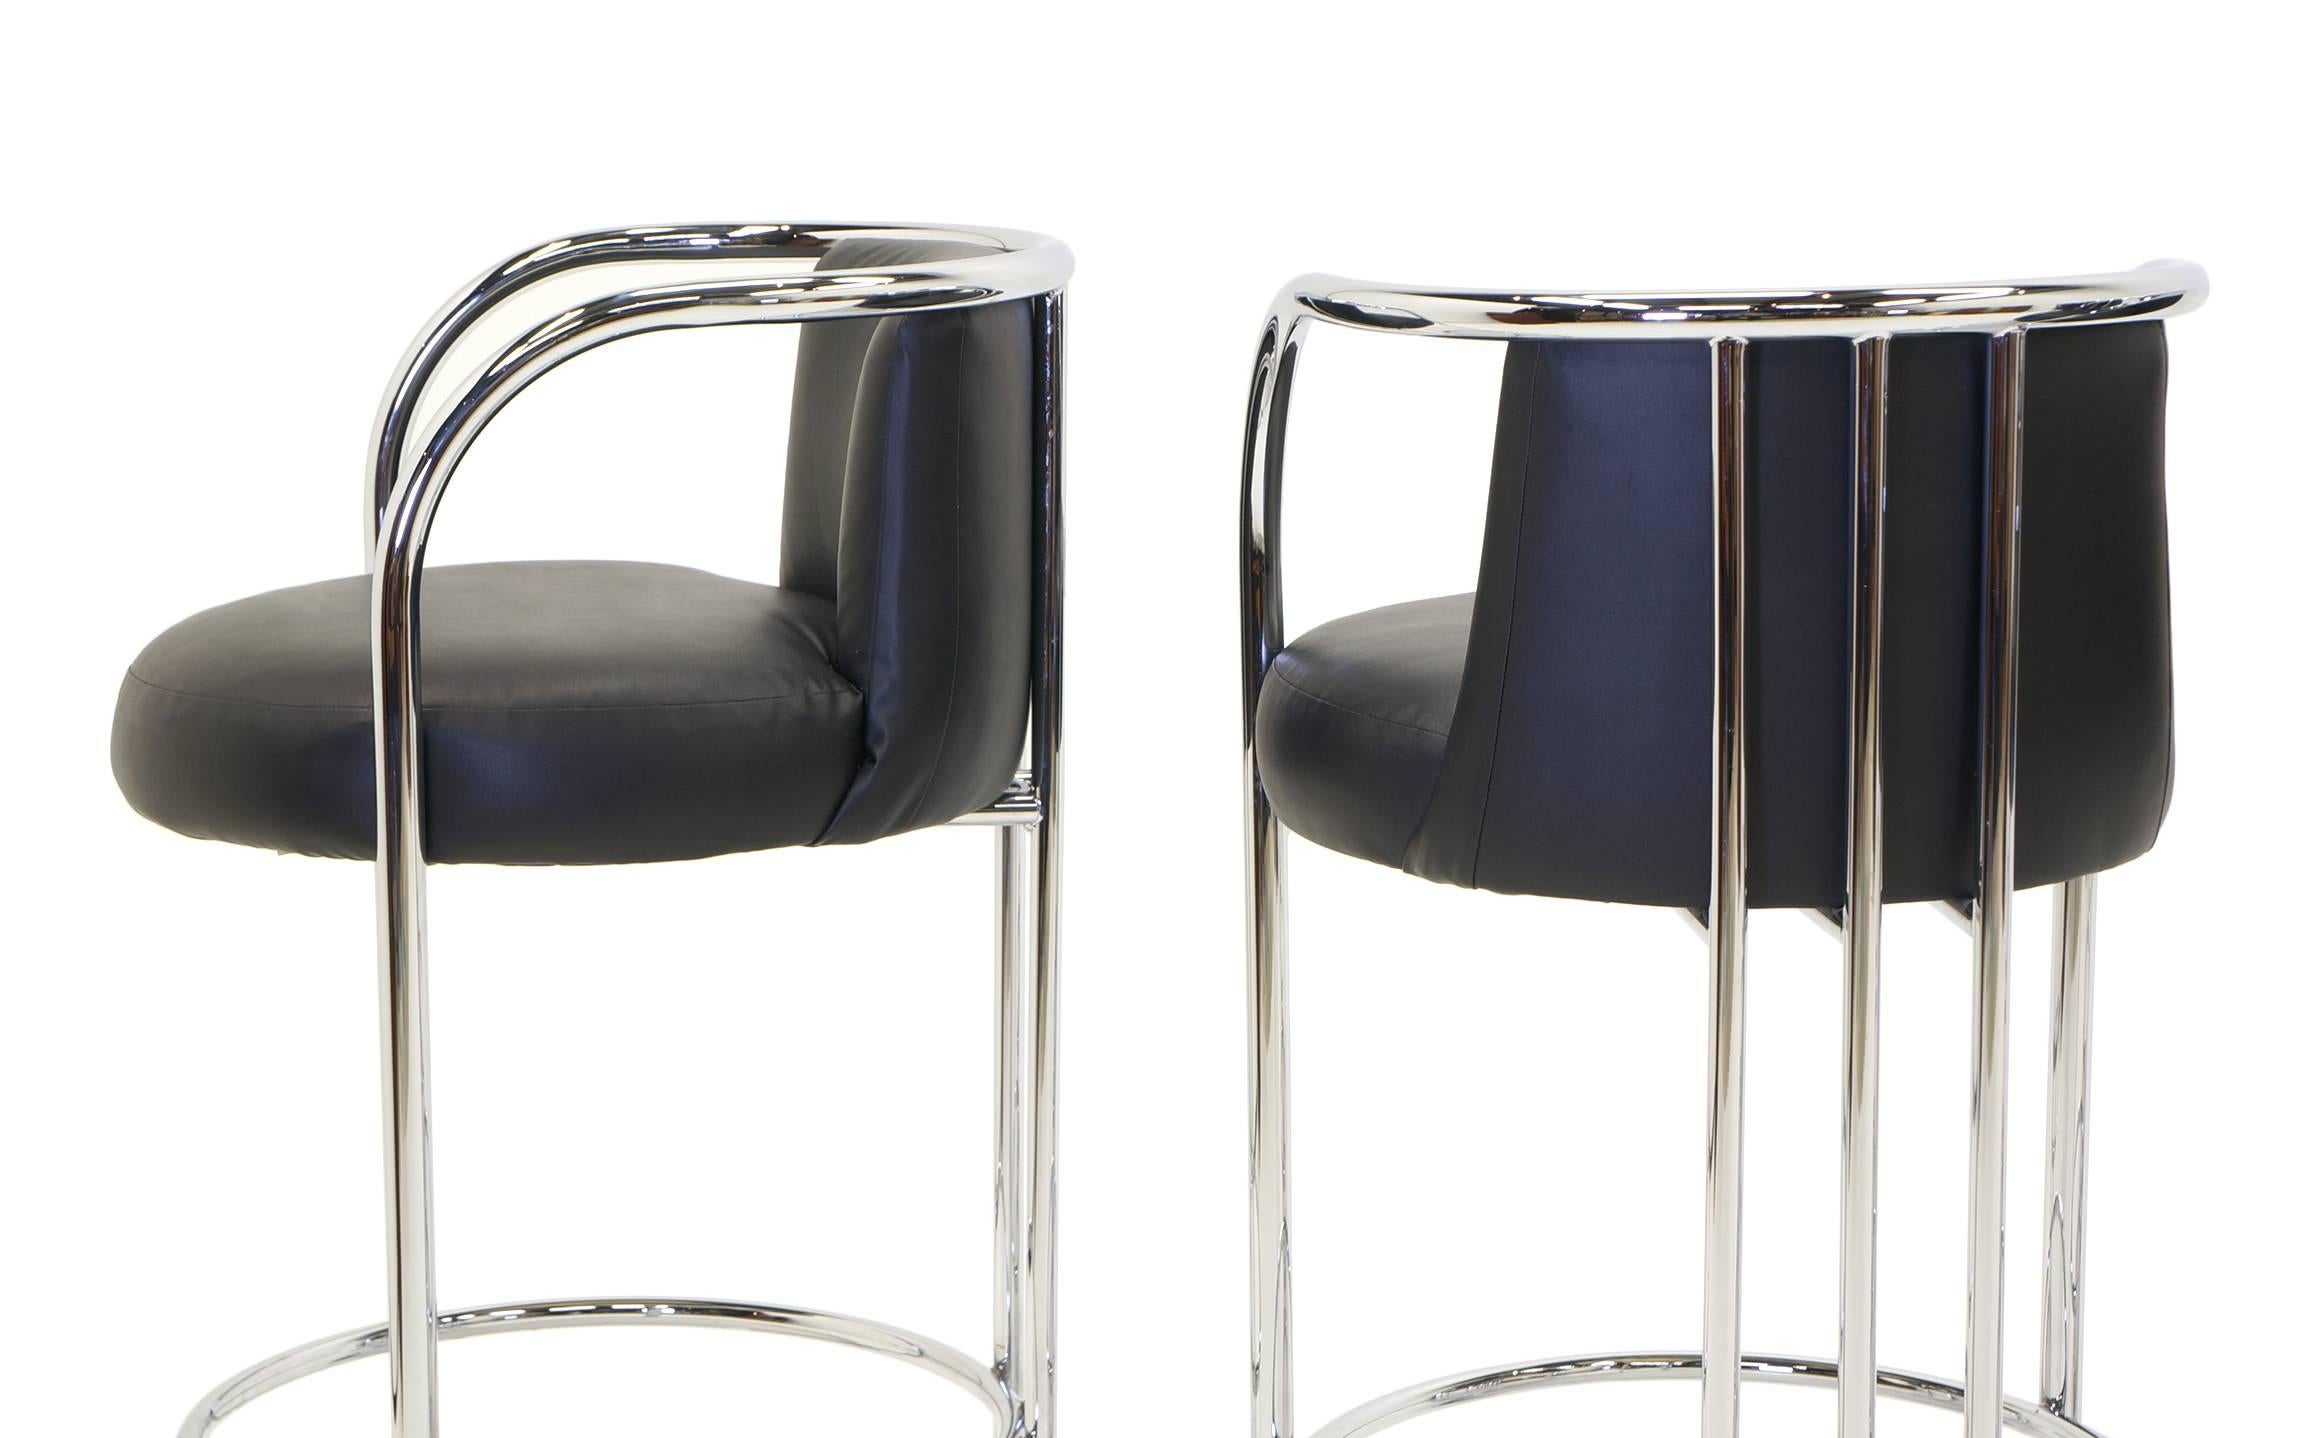 Milo Baughman for Thayer Coggin Chrome and Black Bar Stools, Five Total, Signed 1